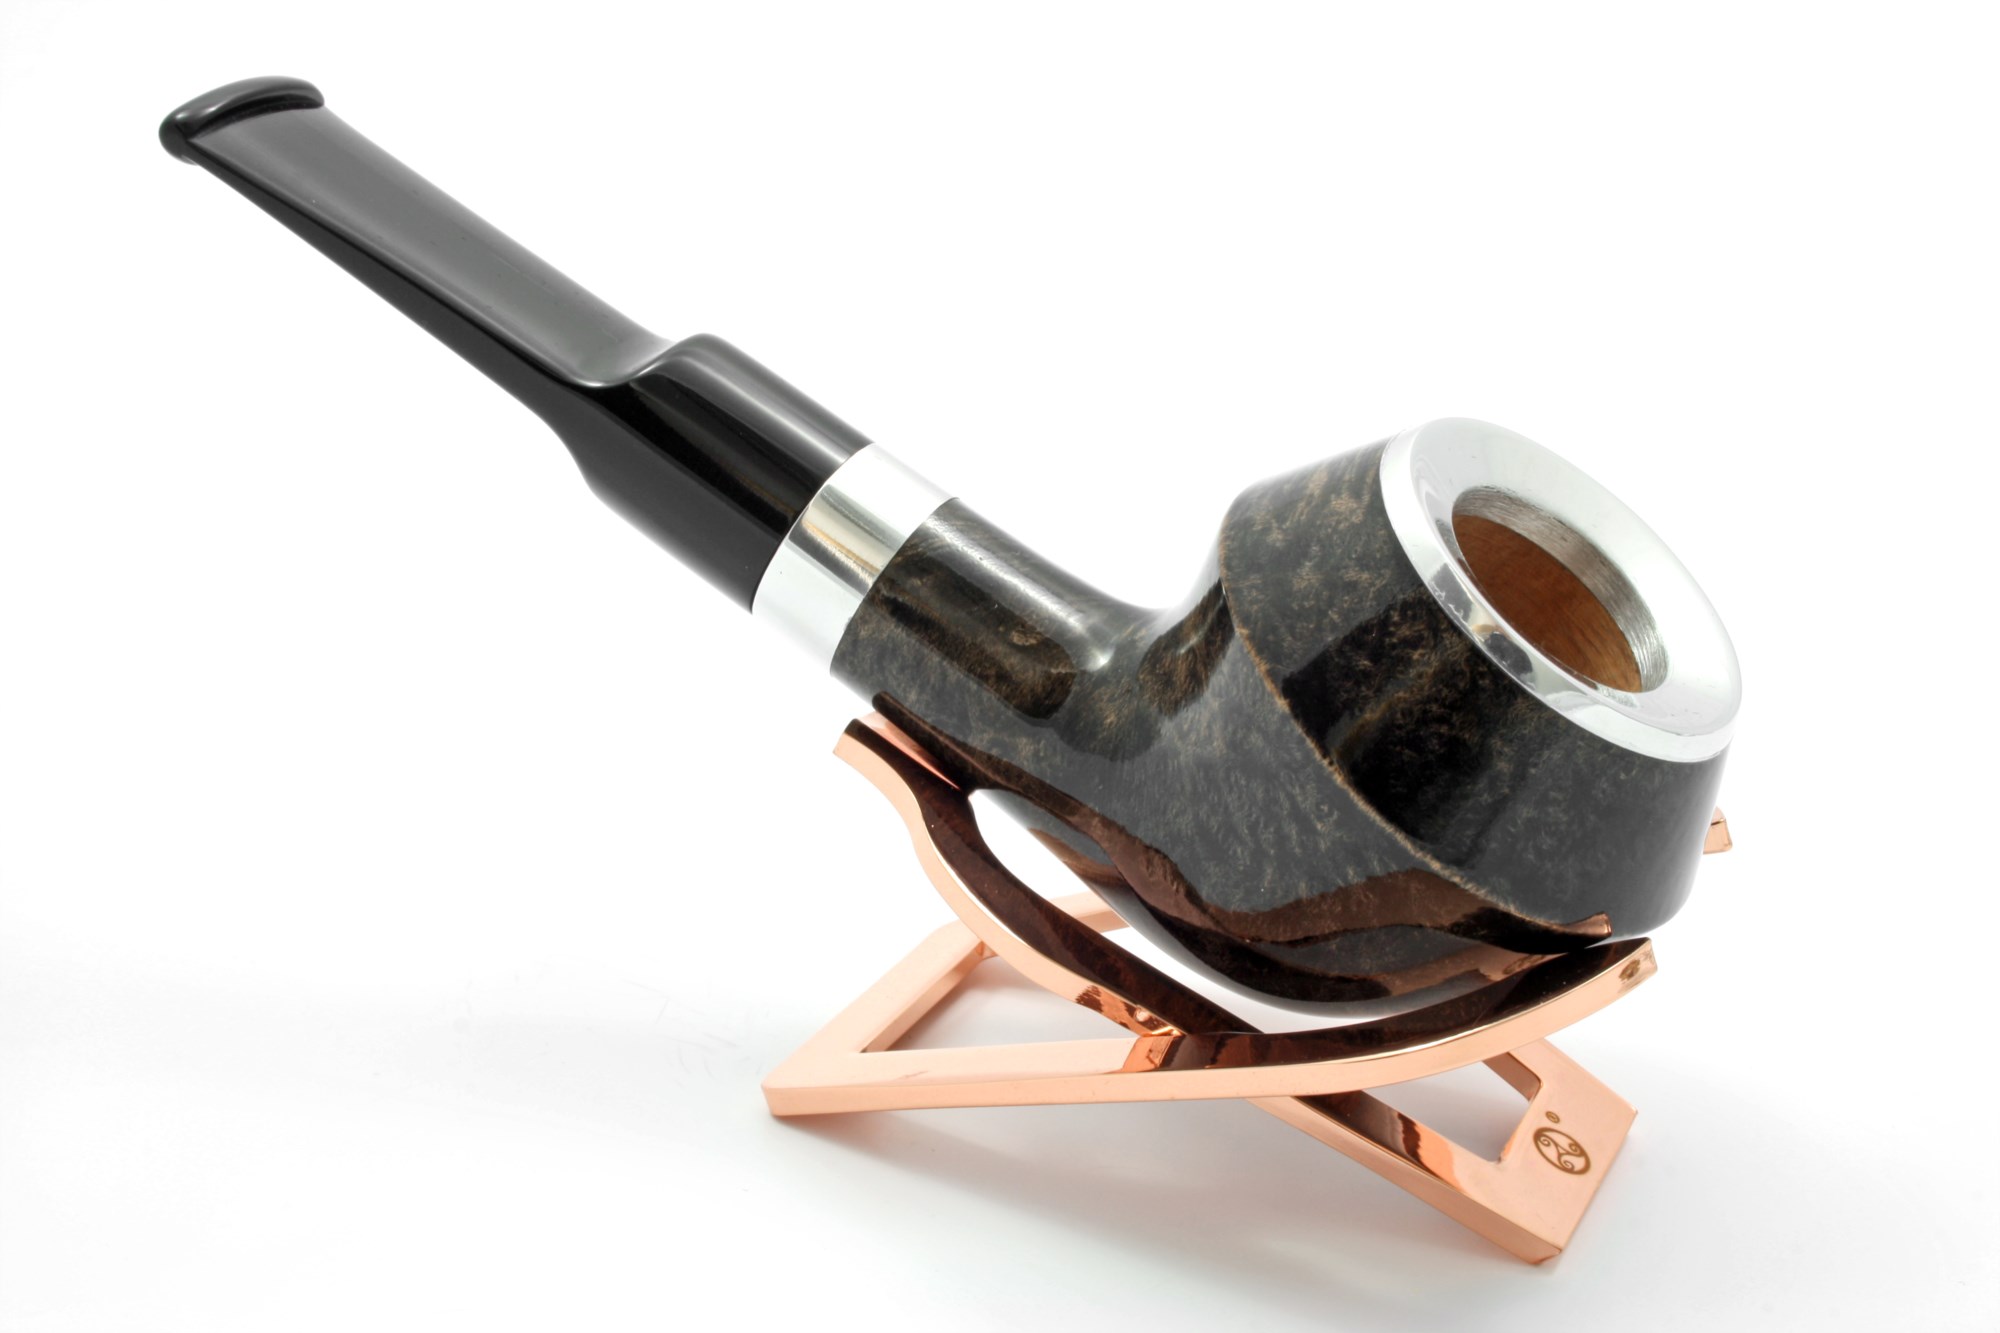 Rattray's Flat Fred Rose Gold Pipestand